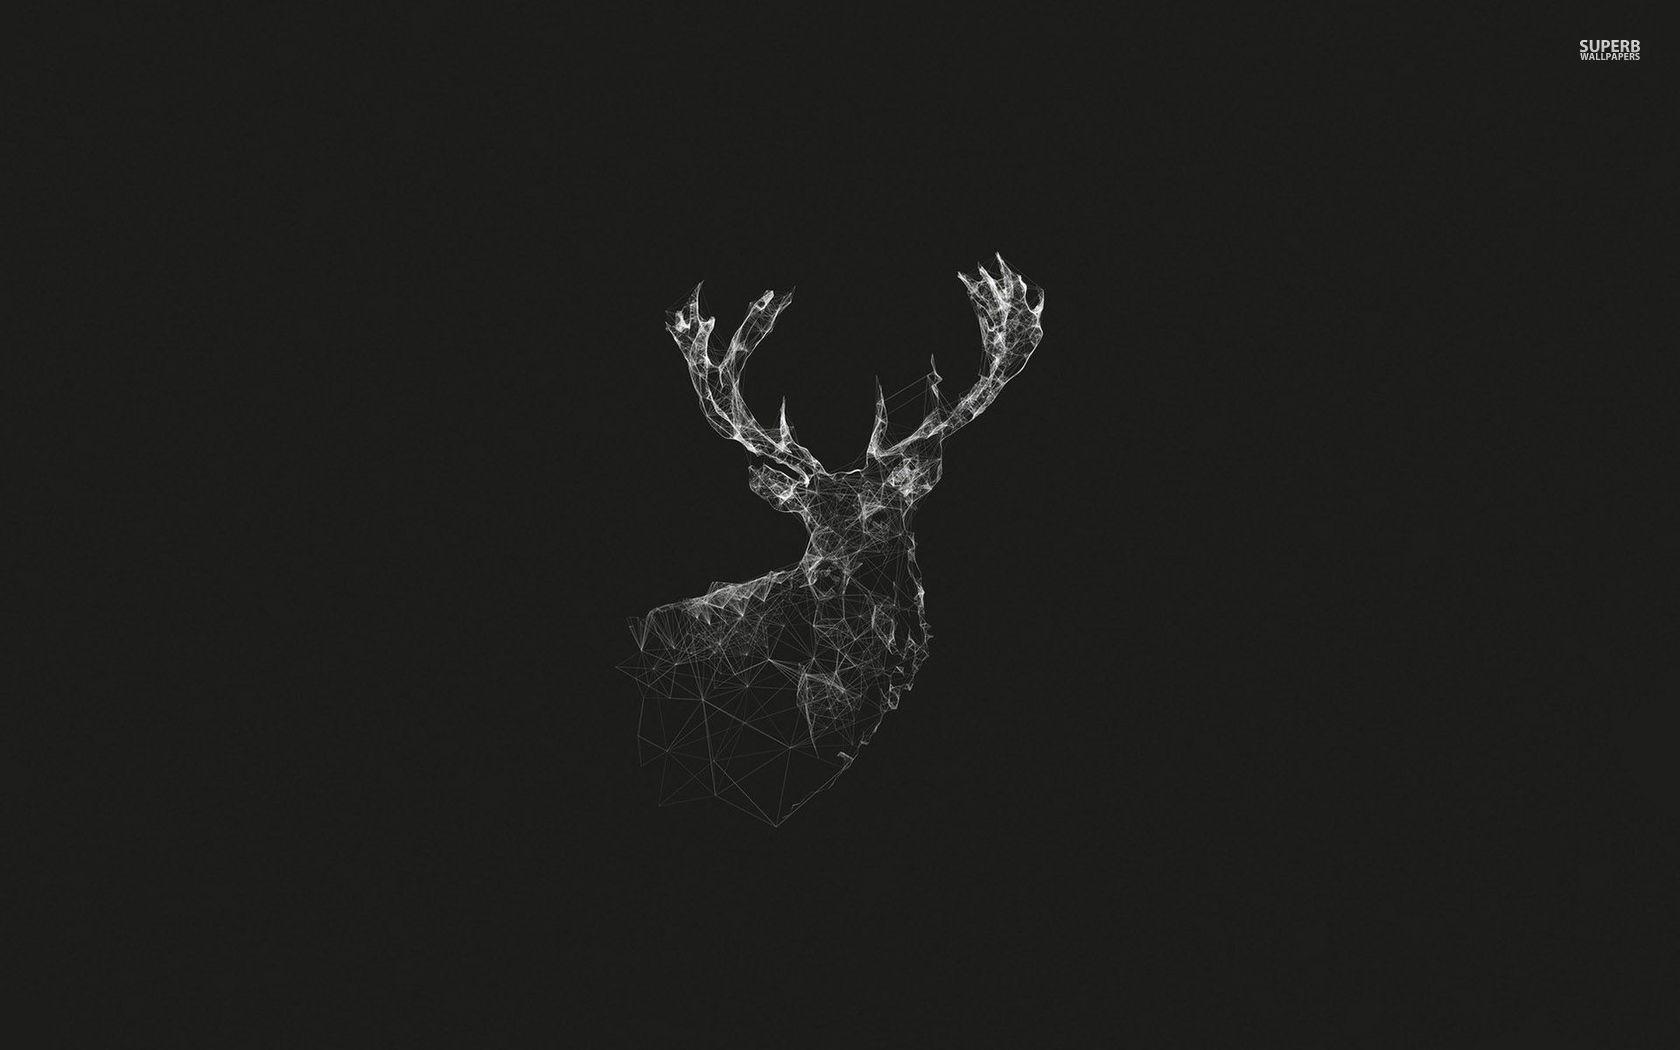 Stag Wallpapers Wallpaper Cave Images, Photos, Reviews